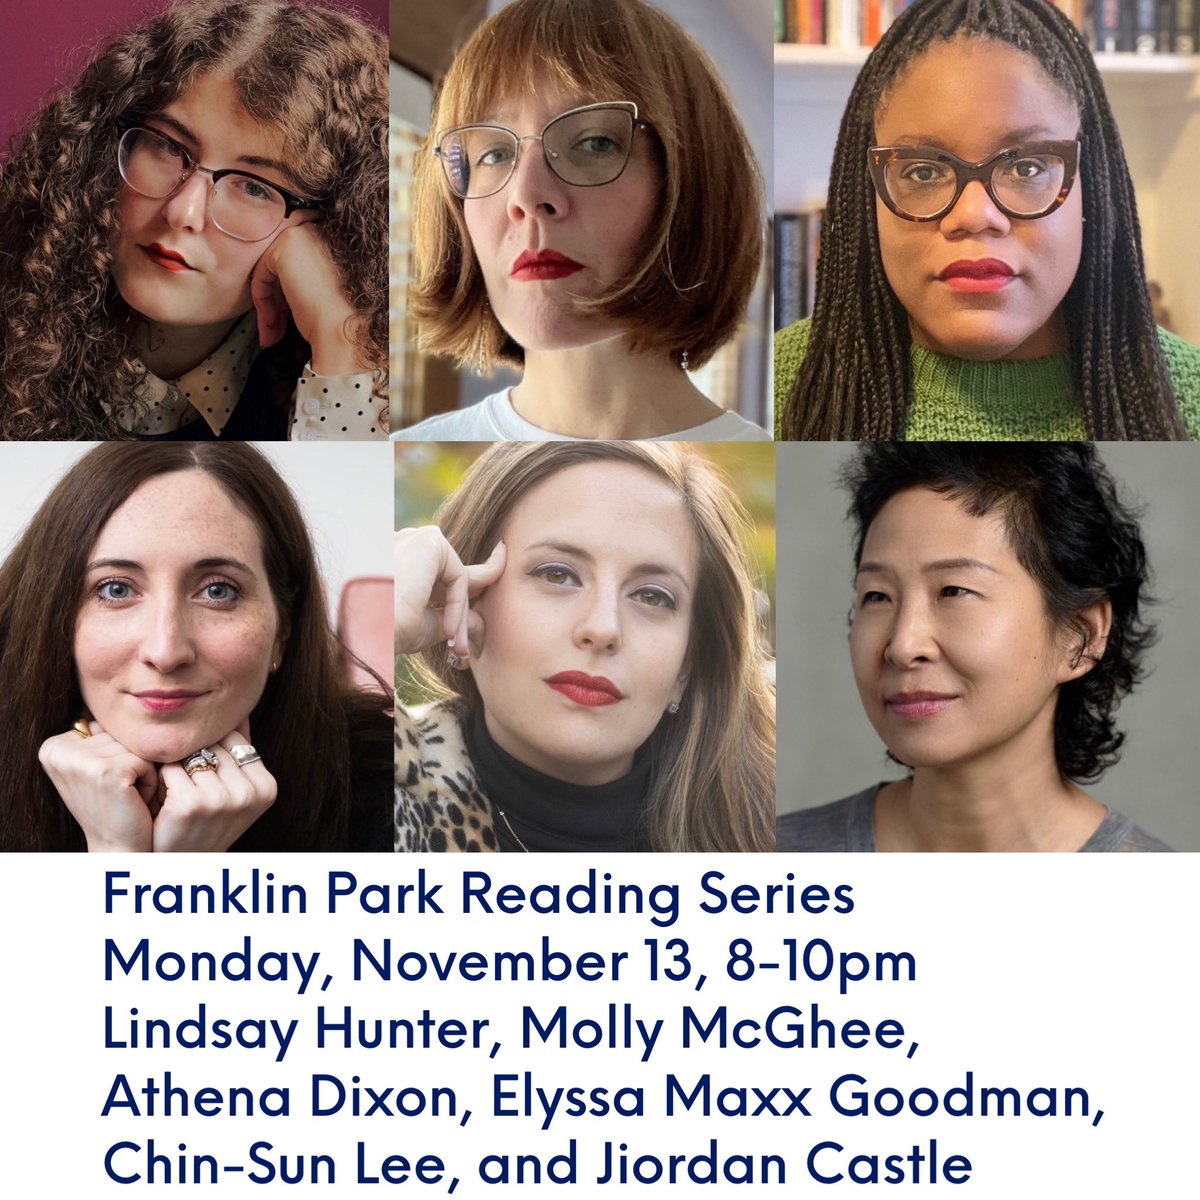 MONDAY, 8PM at the @FranklinParkBK Reading Series: Join us for a star-studded lineup of Powerhouse Women—Lindsay Hunter, @mollymcghee, @AthenaDDixon, @MissManhattanNY, @leechinsun and @jiordancastle—sharing acclaimed new work! Details: fb.me/e/5Ra9ozMJU #Free #crownheights